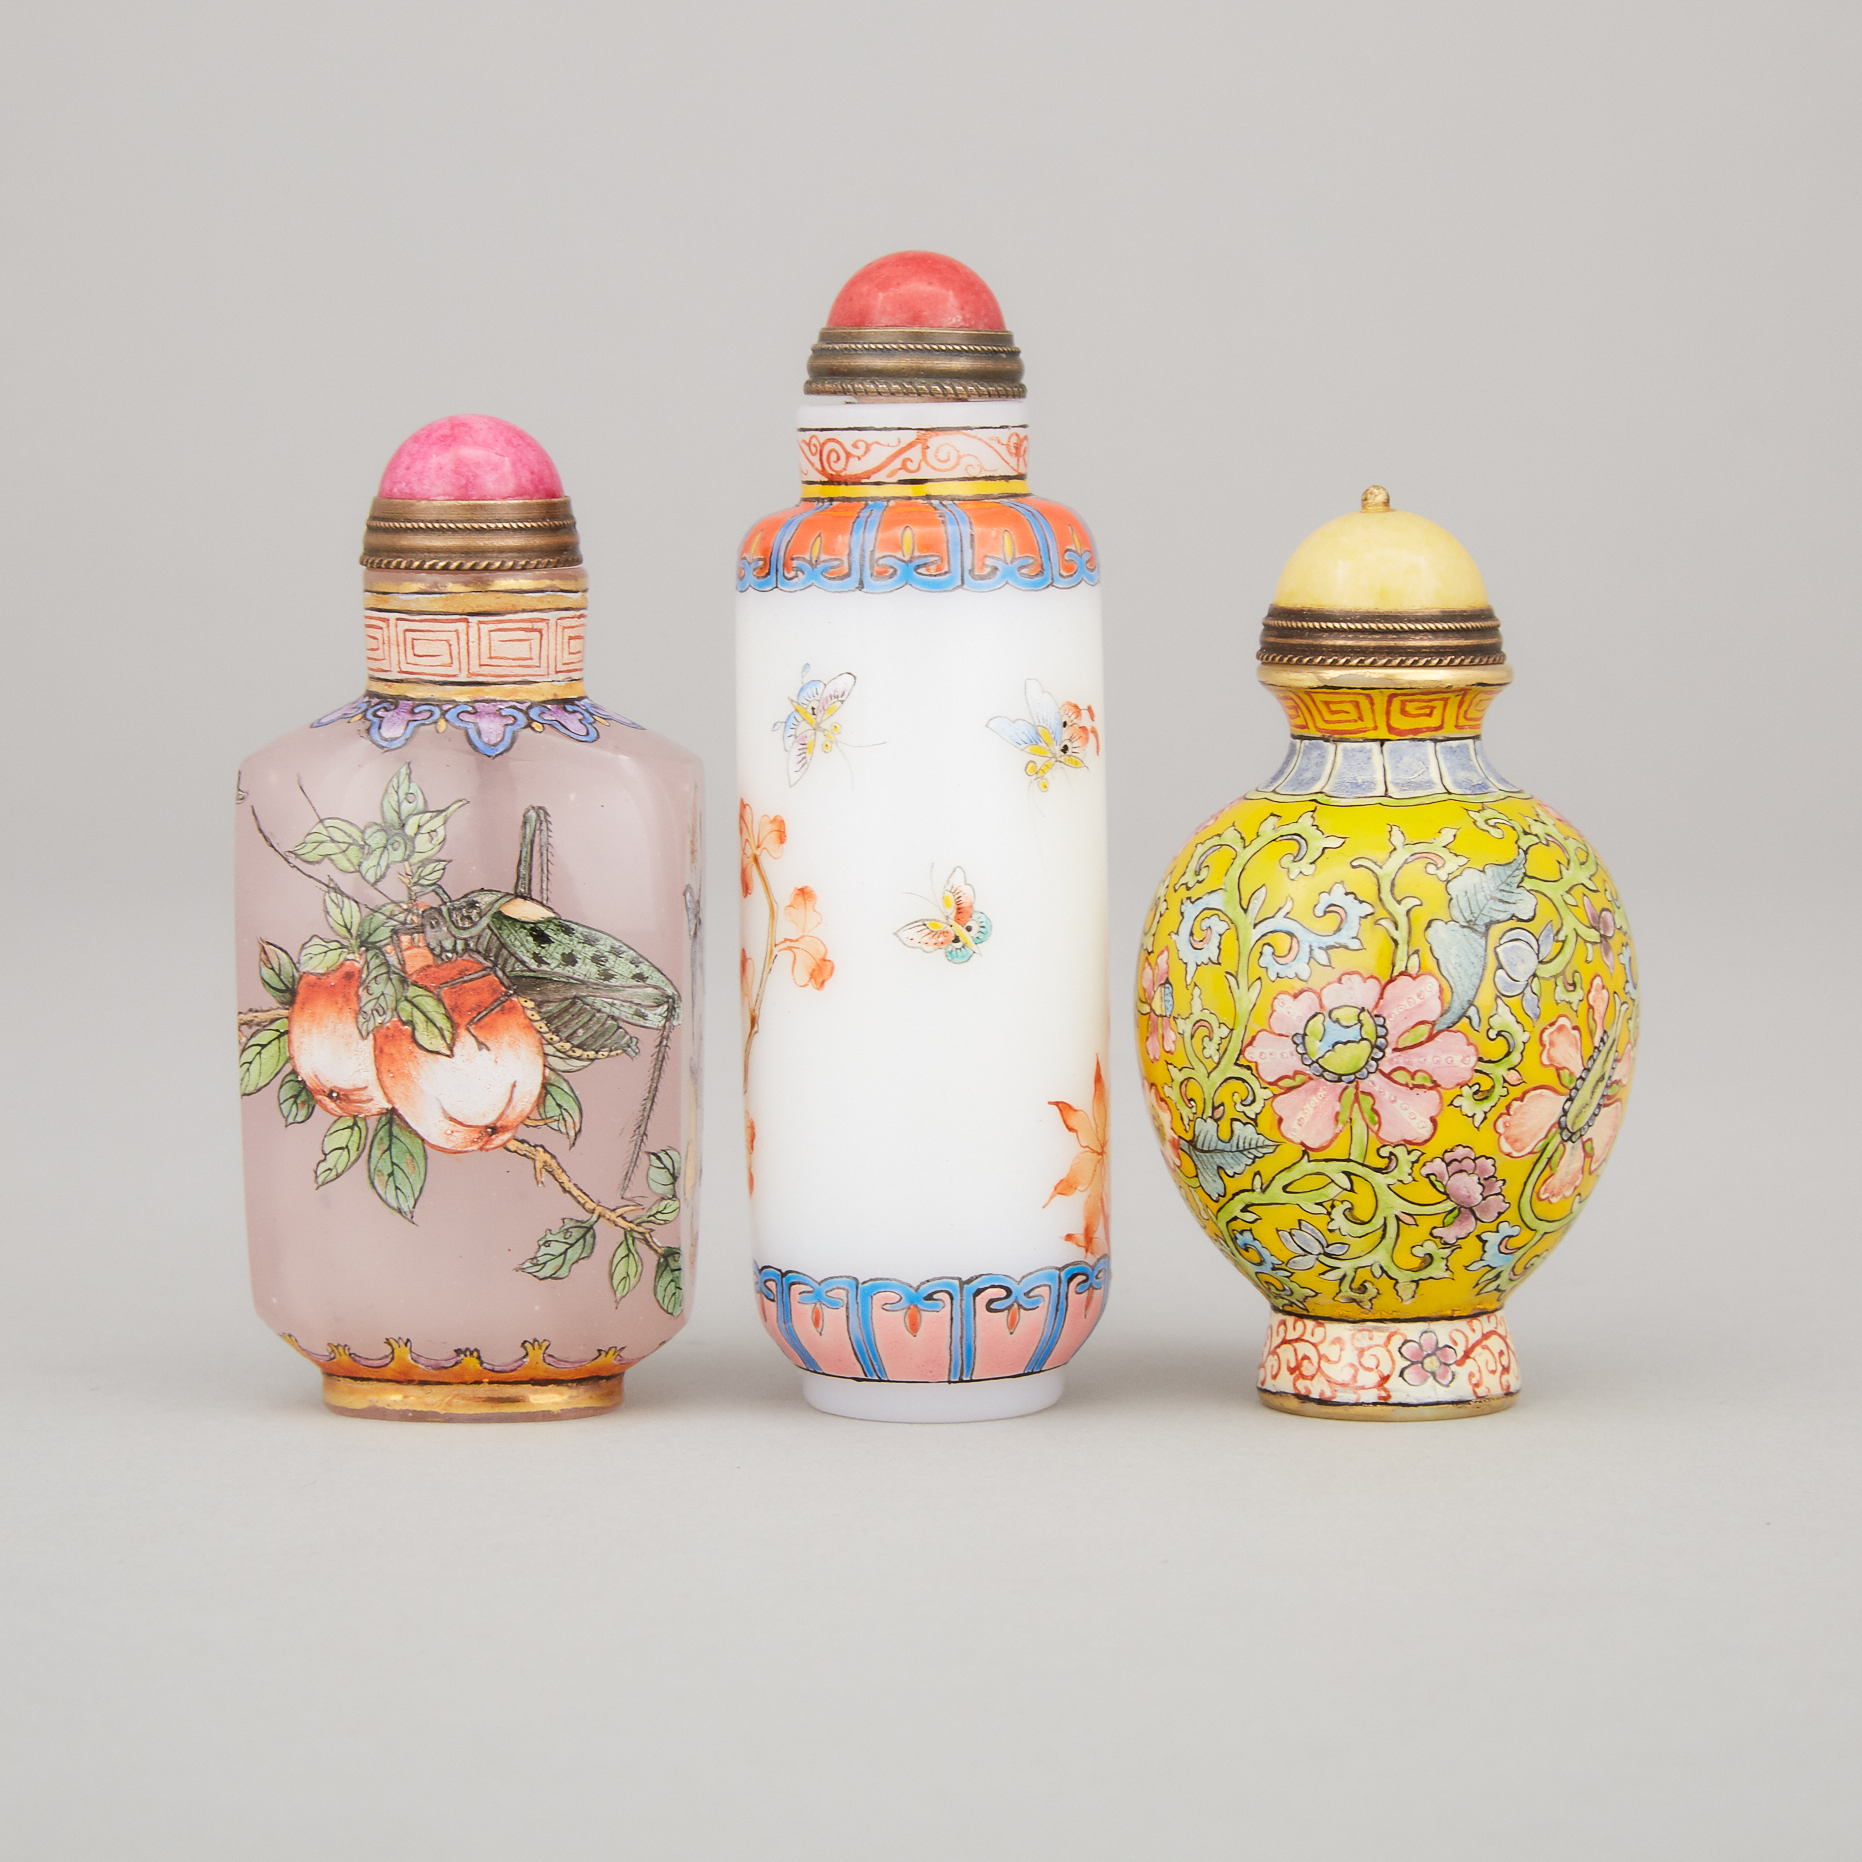 A Group of Three Glass Snuff Bottles